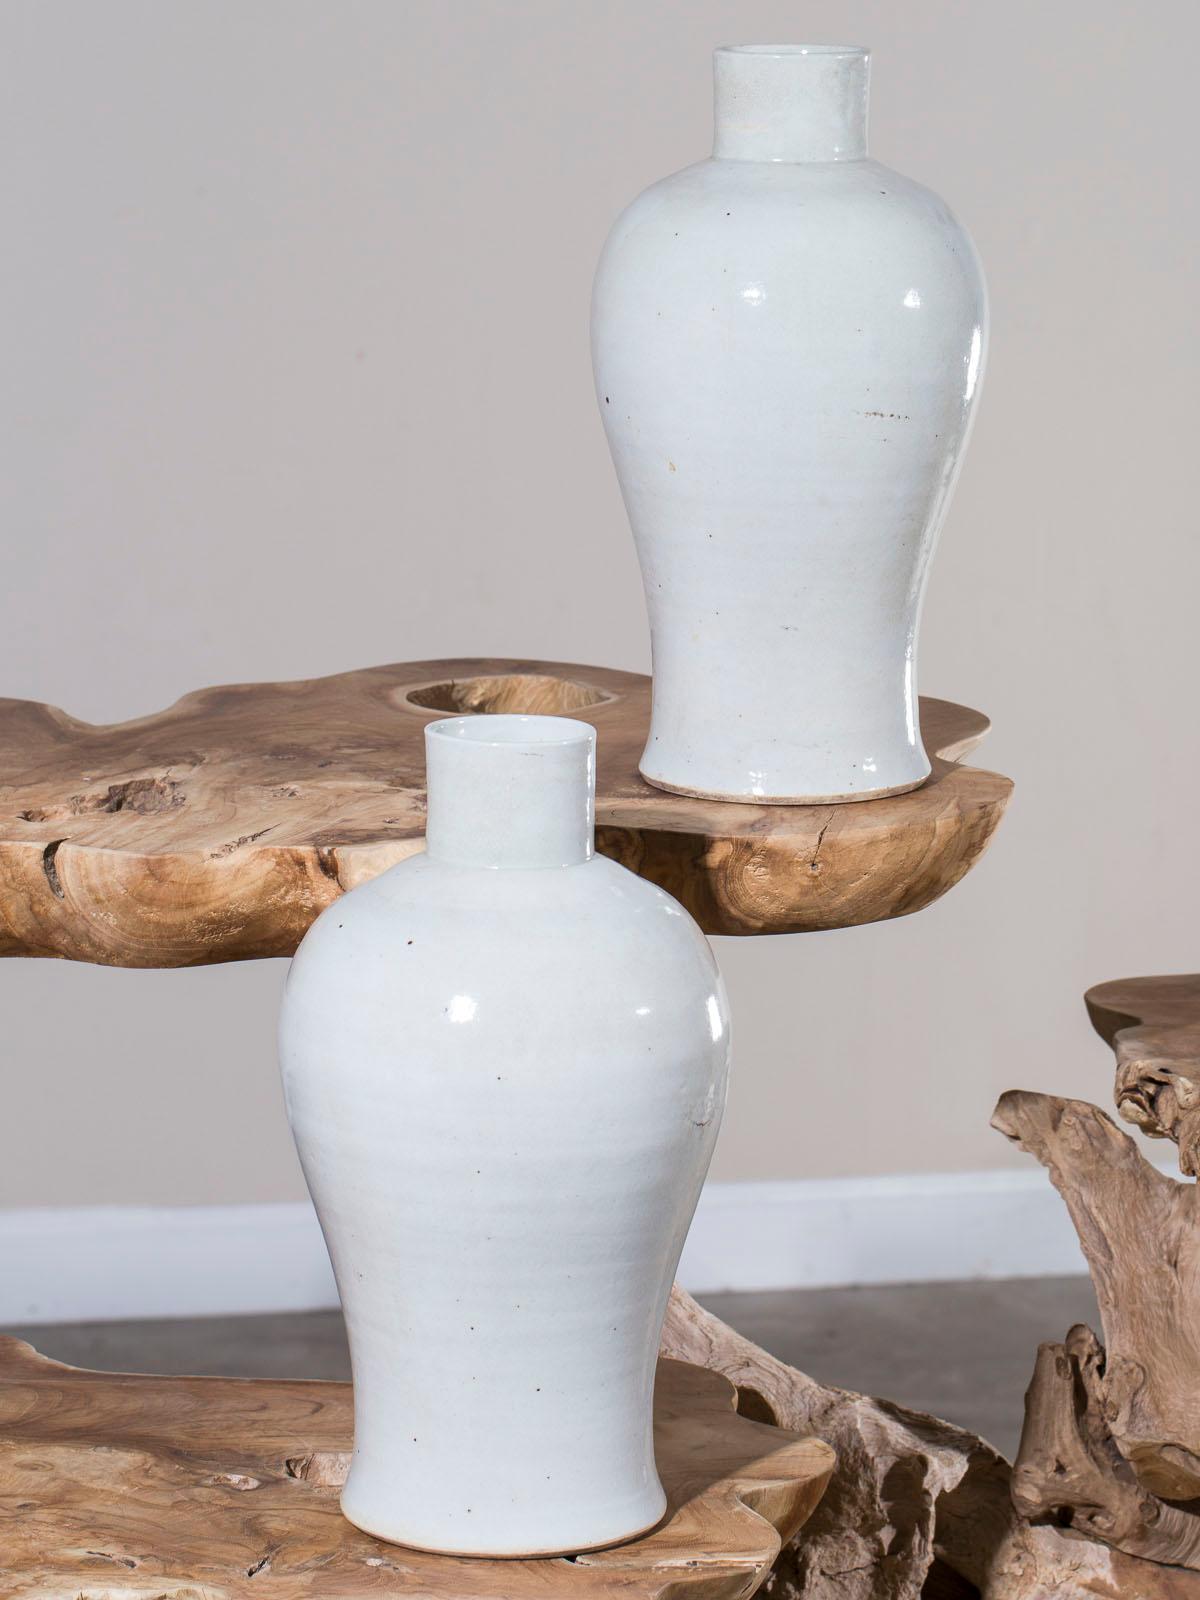 Two modern hand made Chinese Mei Ping glazed ceramic vases with a monochromatic color. This type of vase with a narrow neck atop a larger body became known as 